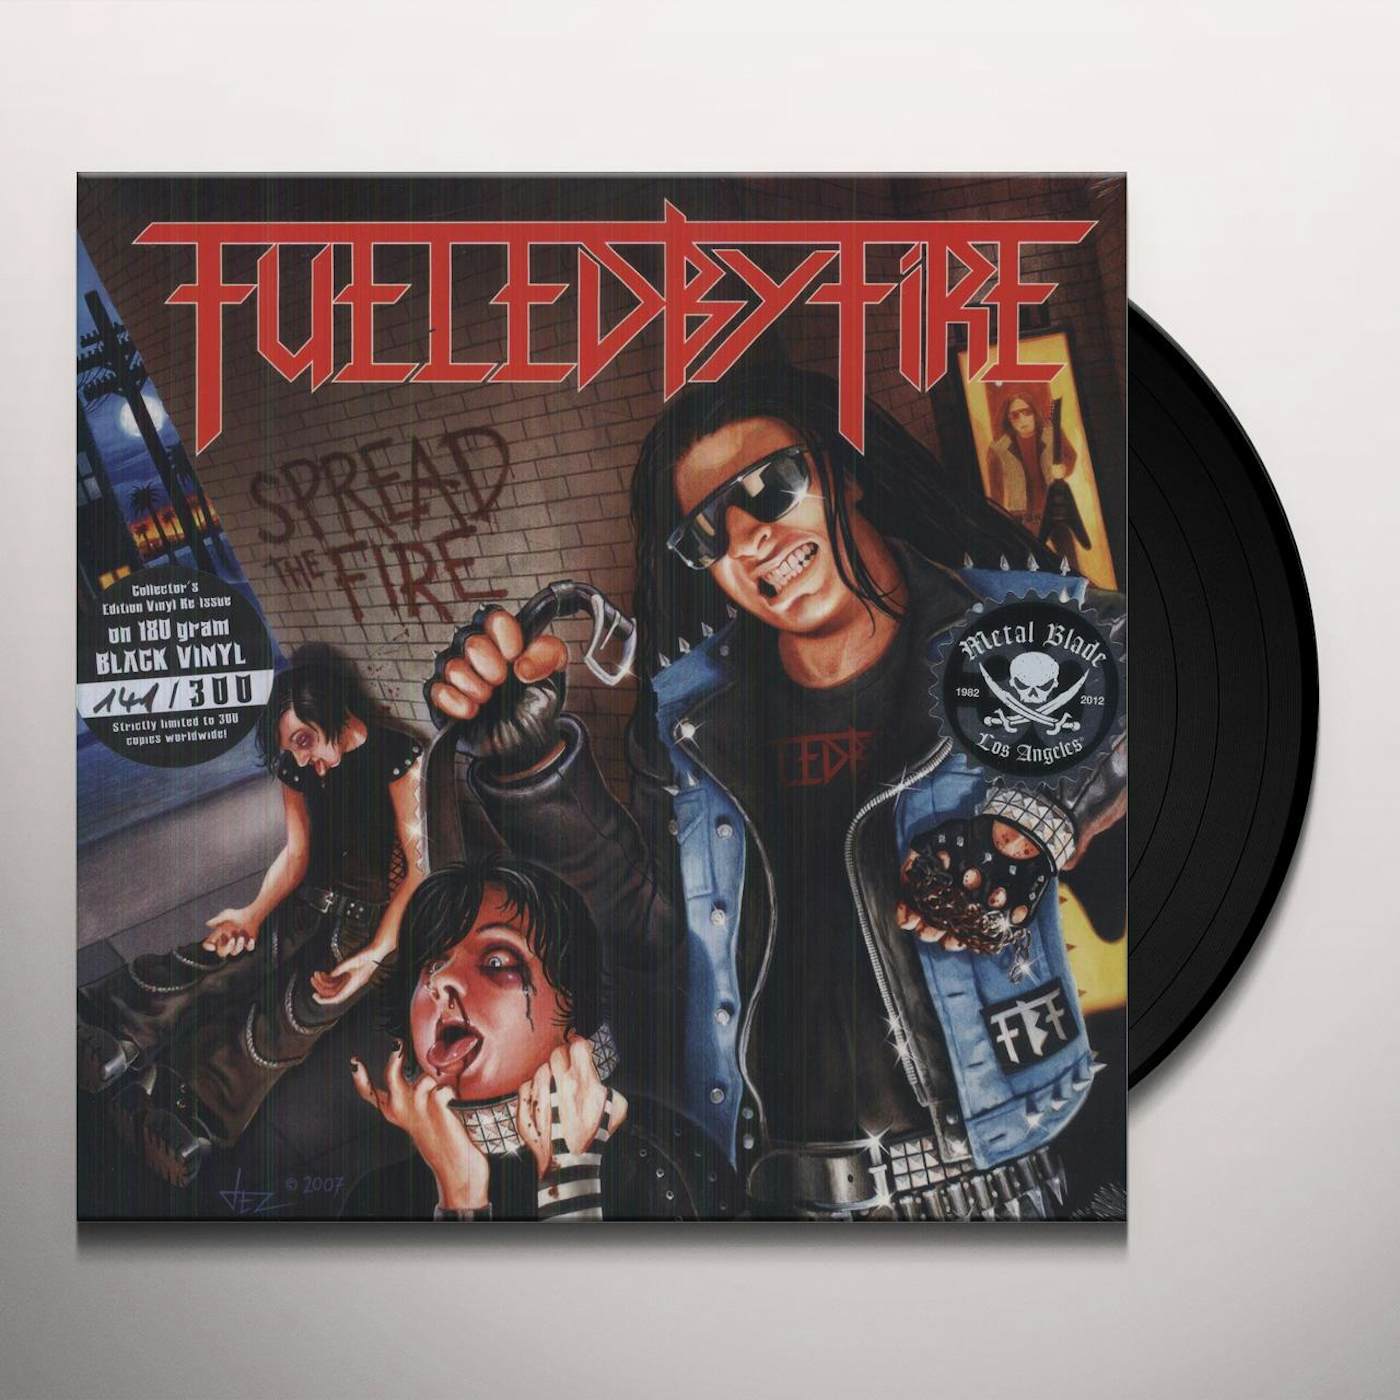 Fueled By Fire Spread the Fire Vinyl Record